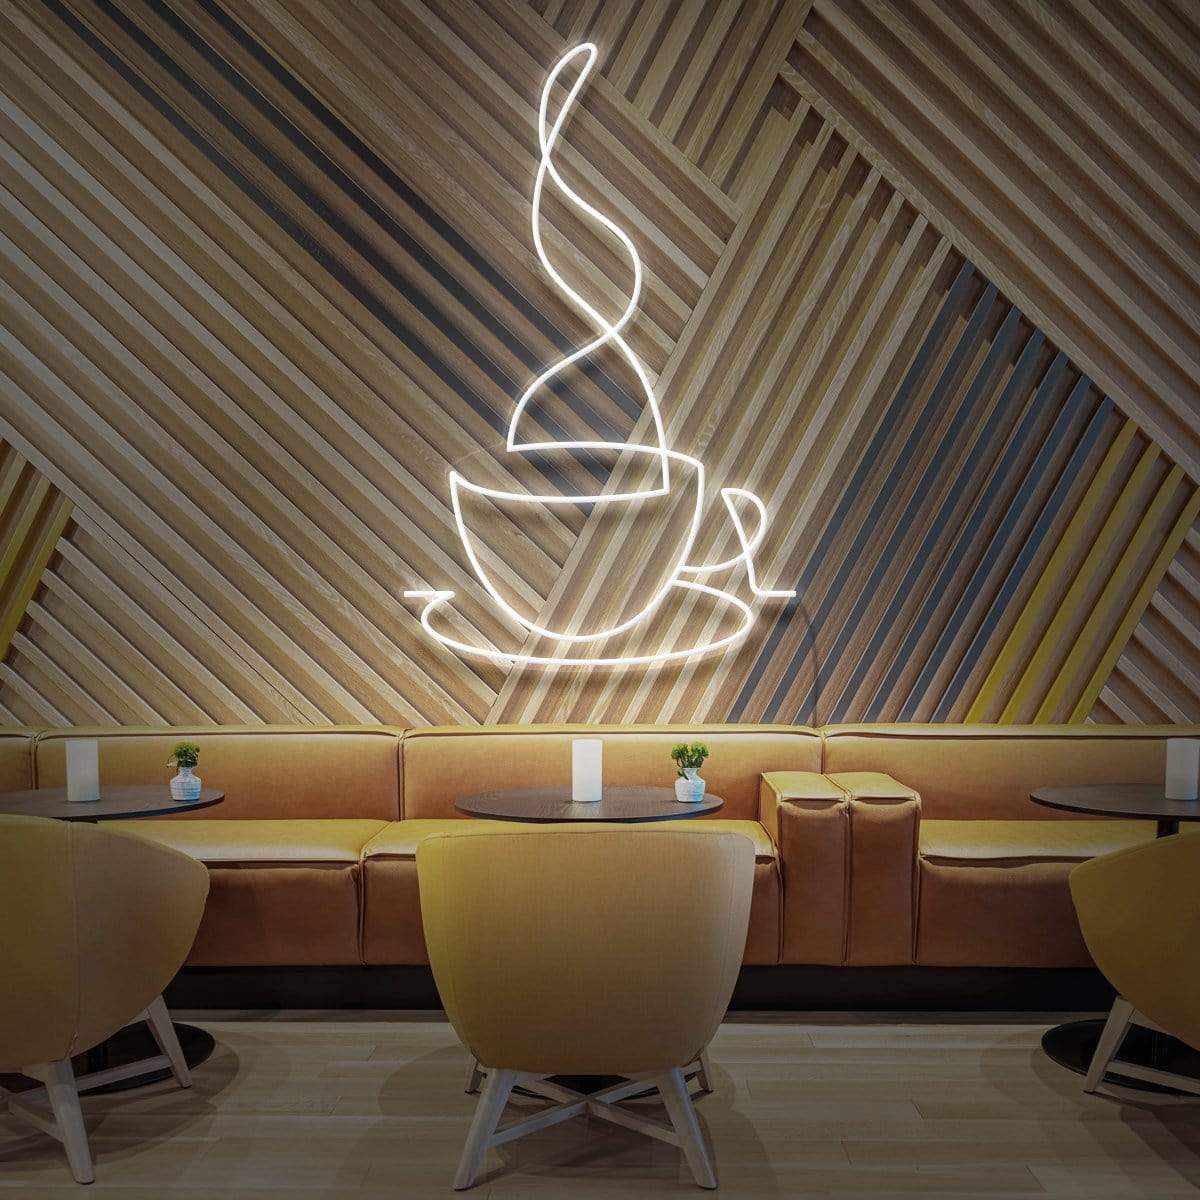 "Teacup Line Art" Neon Sign for Cafés 60cm (2ft) / White / LED Neon by Neon Icons